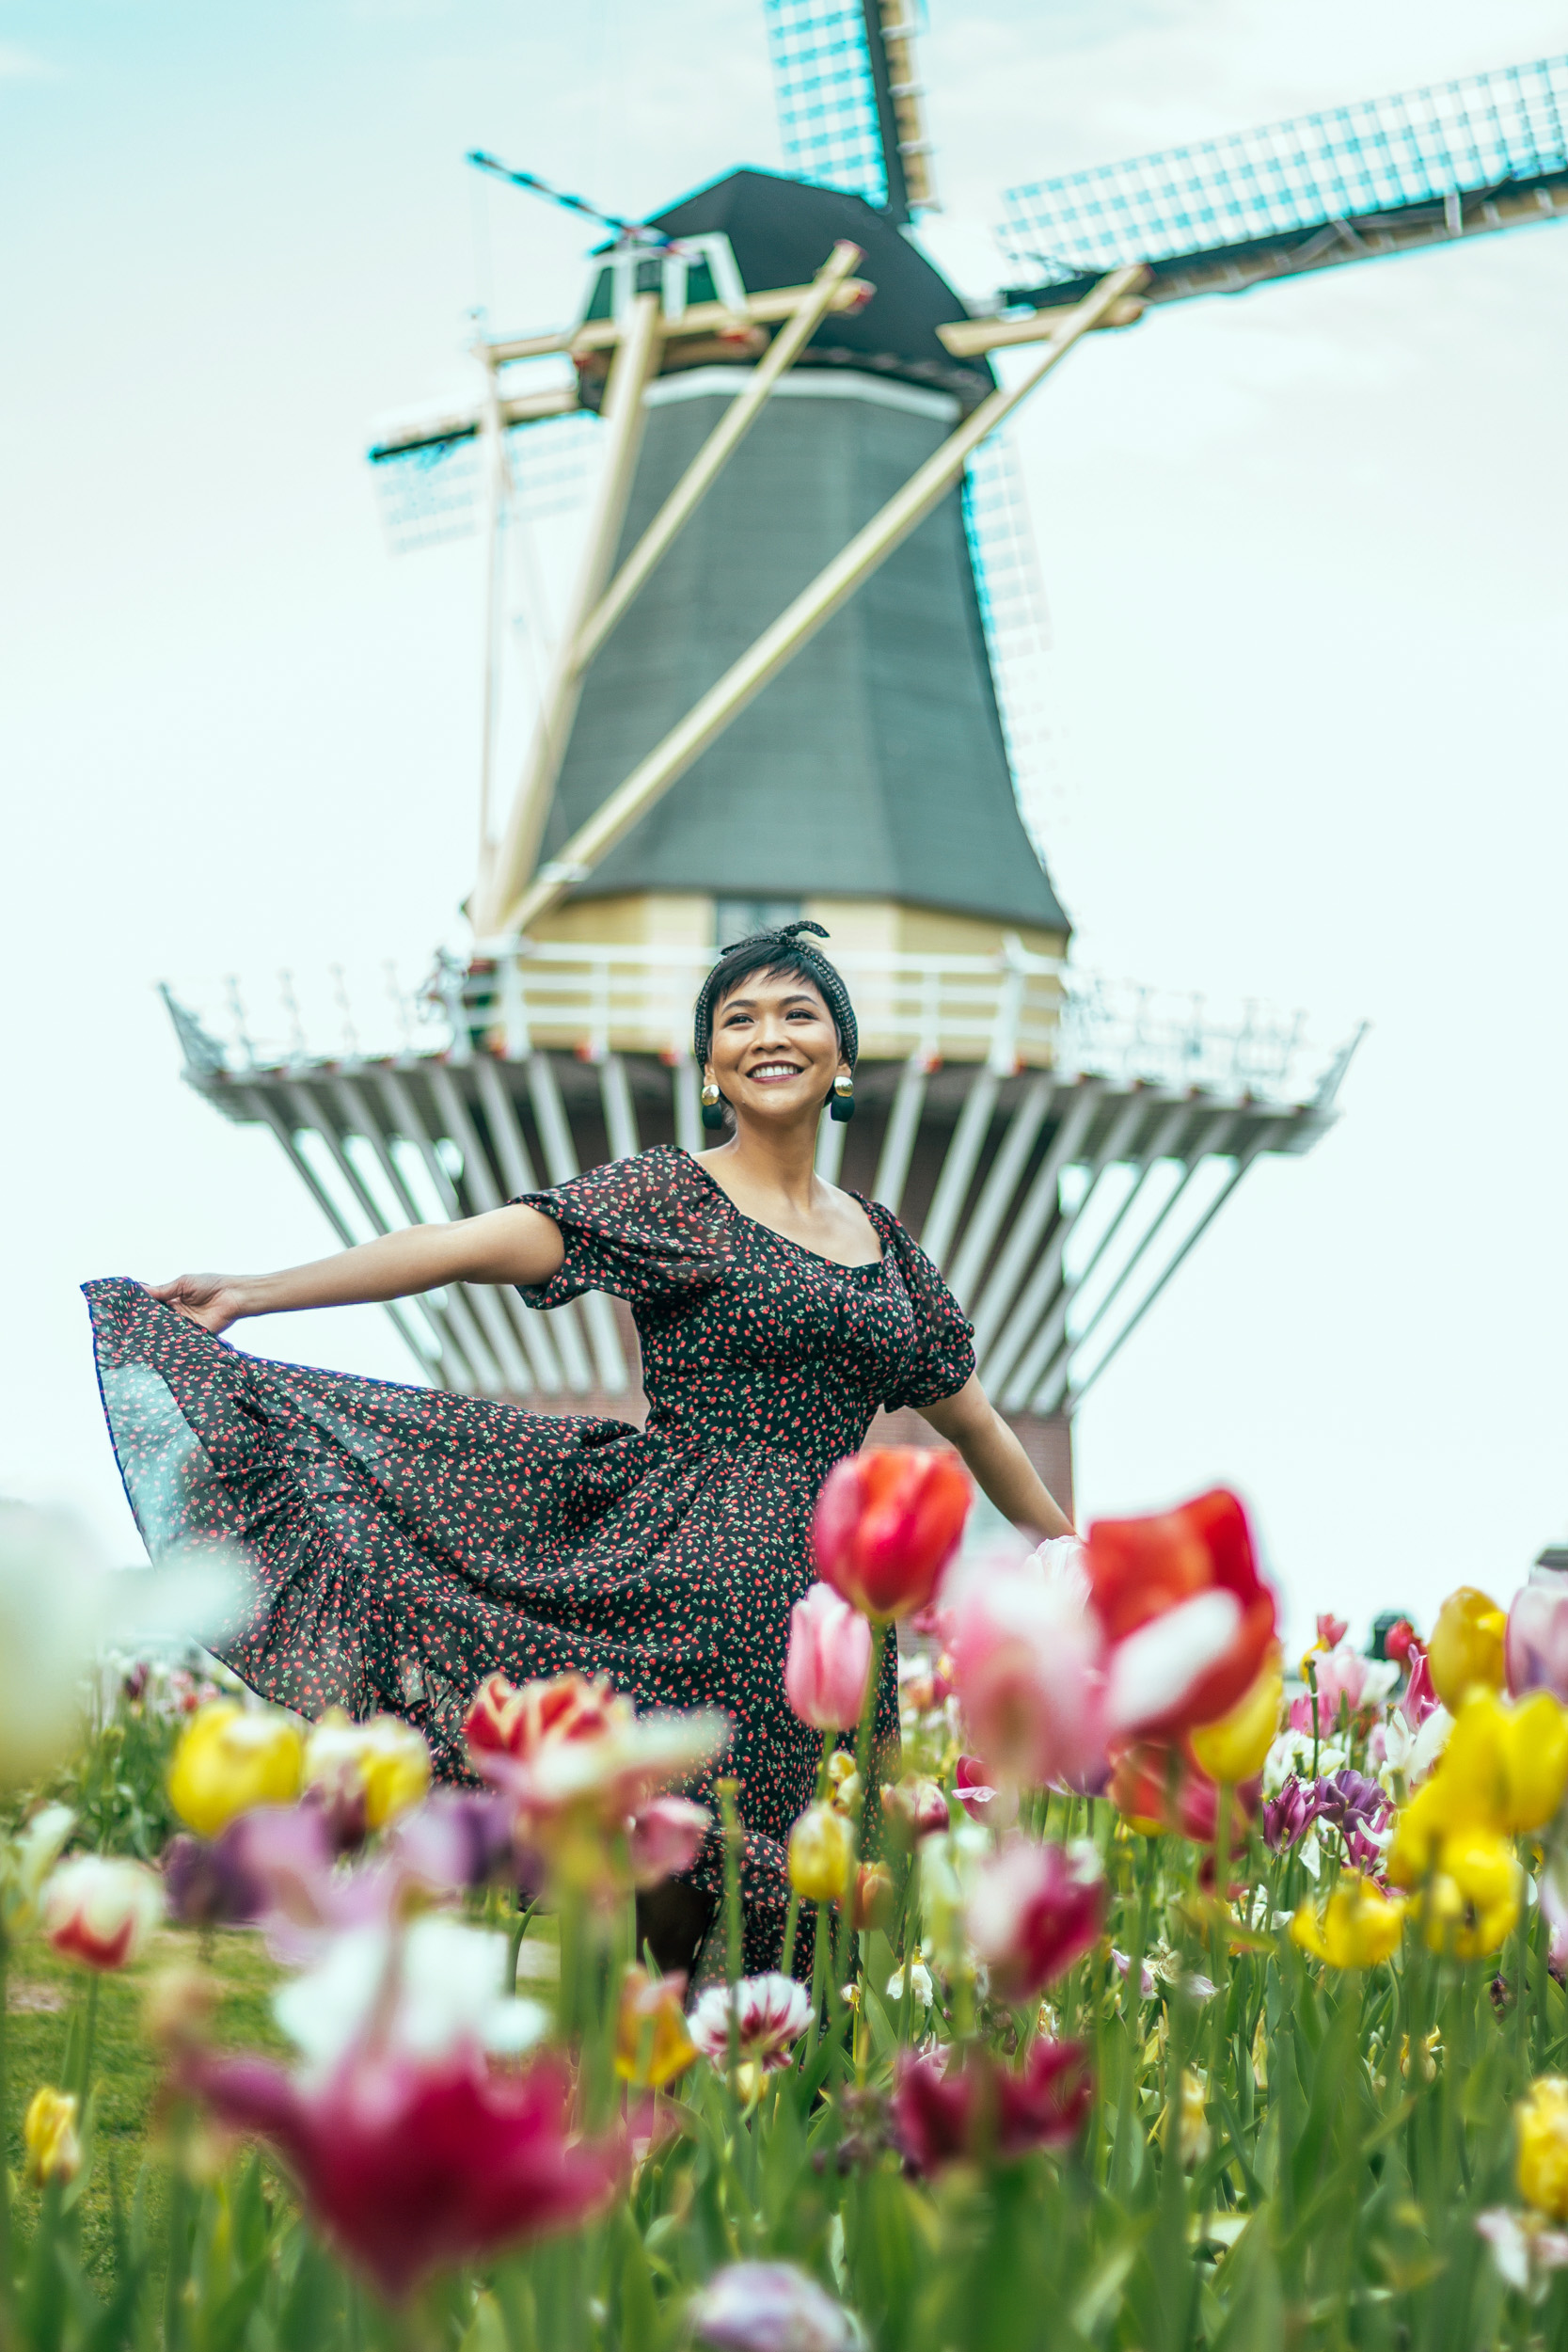 A woman is smiling and moving her dress surrounded by colorful tulips and a windmill in Keukenhof Gardens.